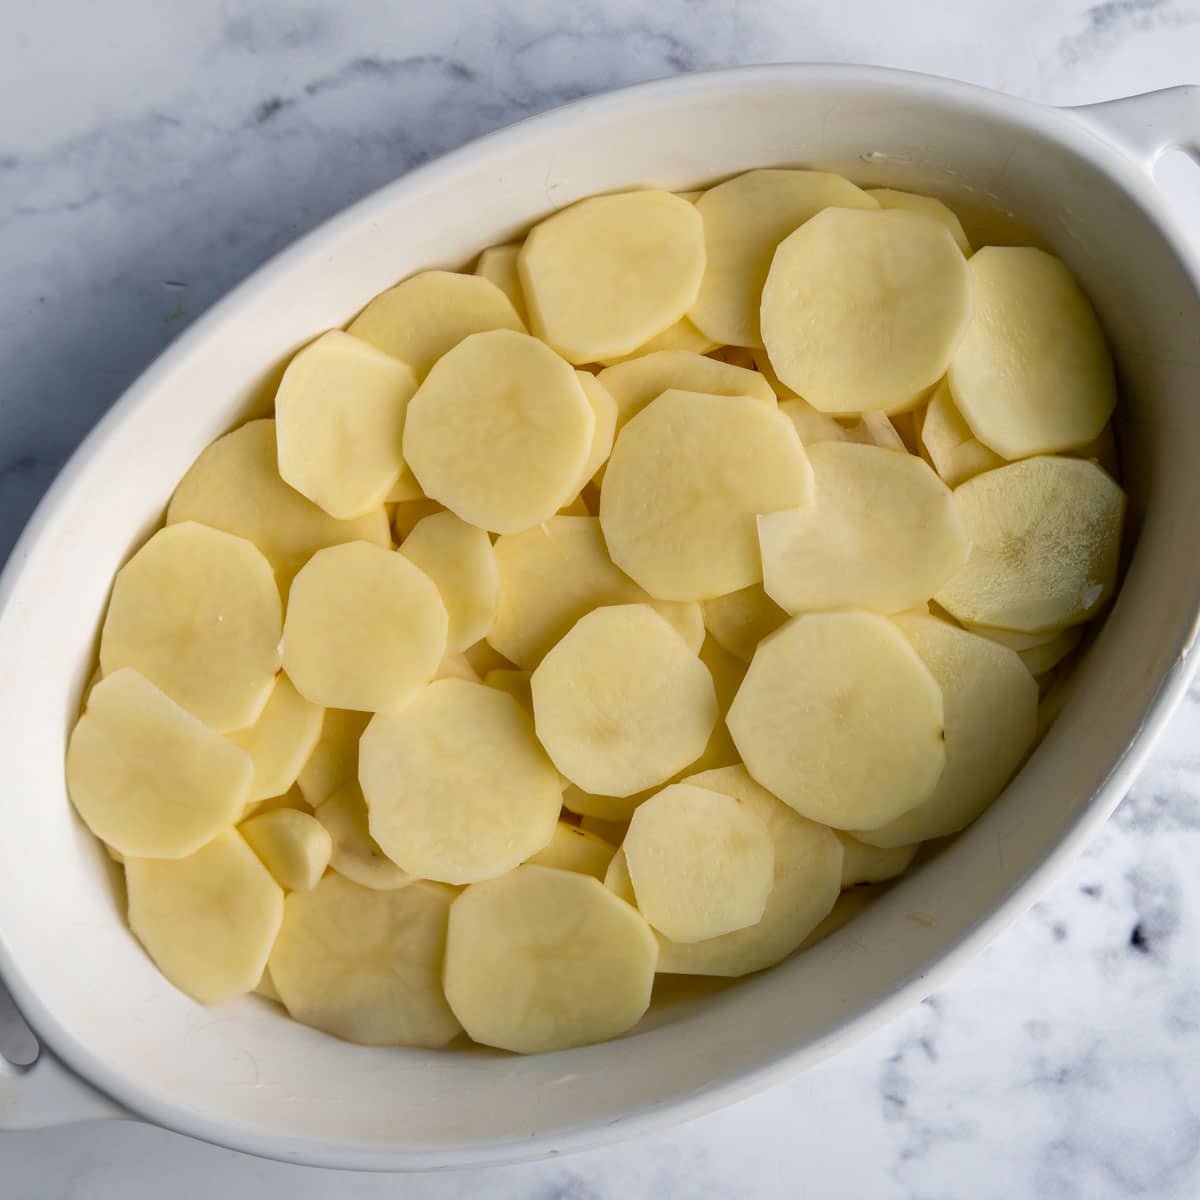 a layer of sliced unbaked potatoes in a baking dish.